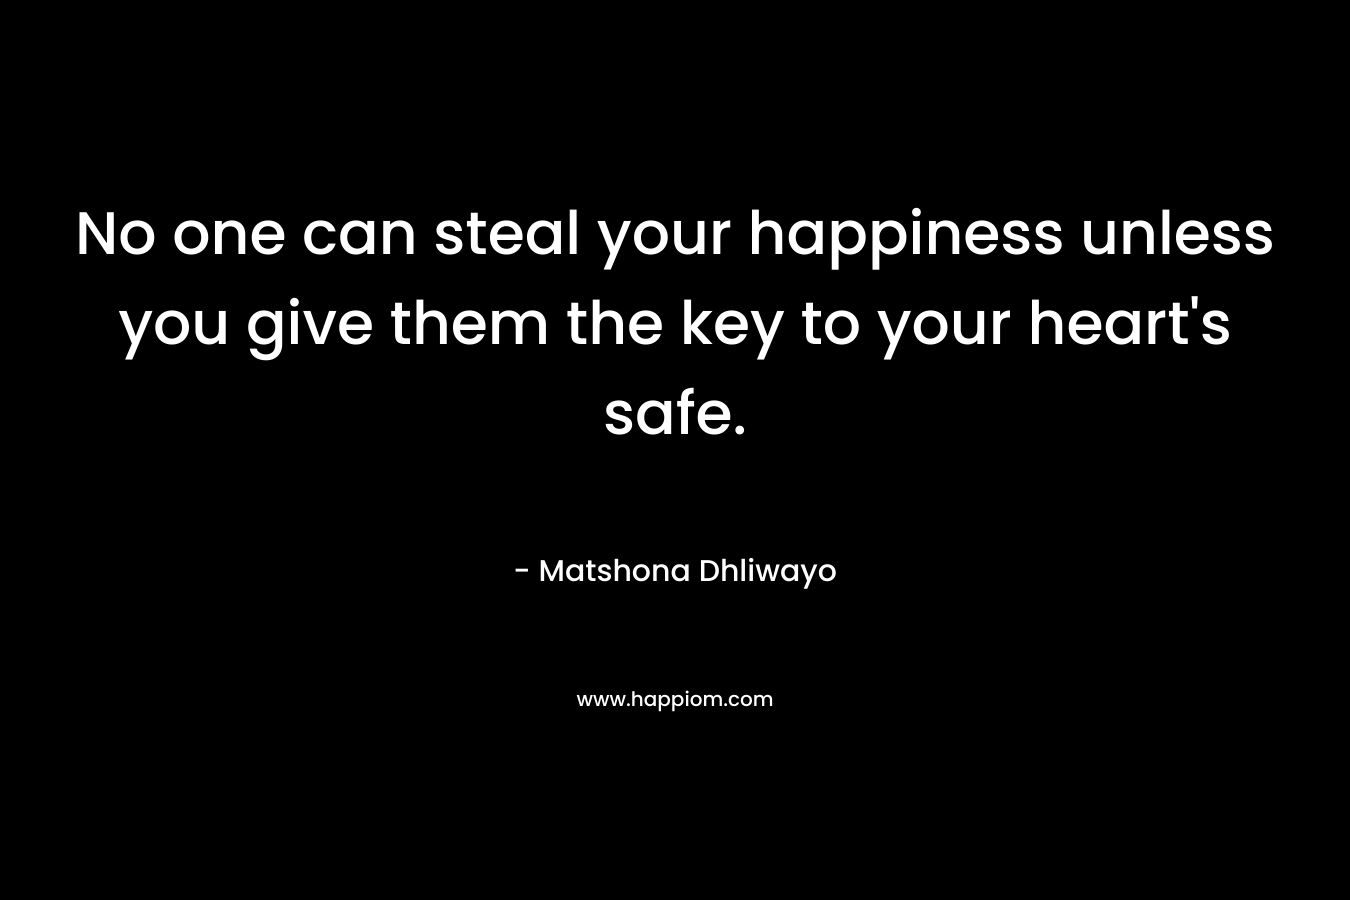 No one can steal your happiness unless you give them the key to your heart's safe.